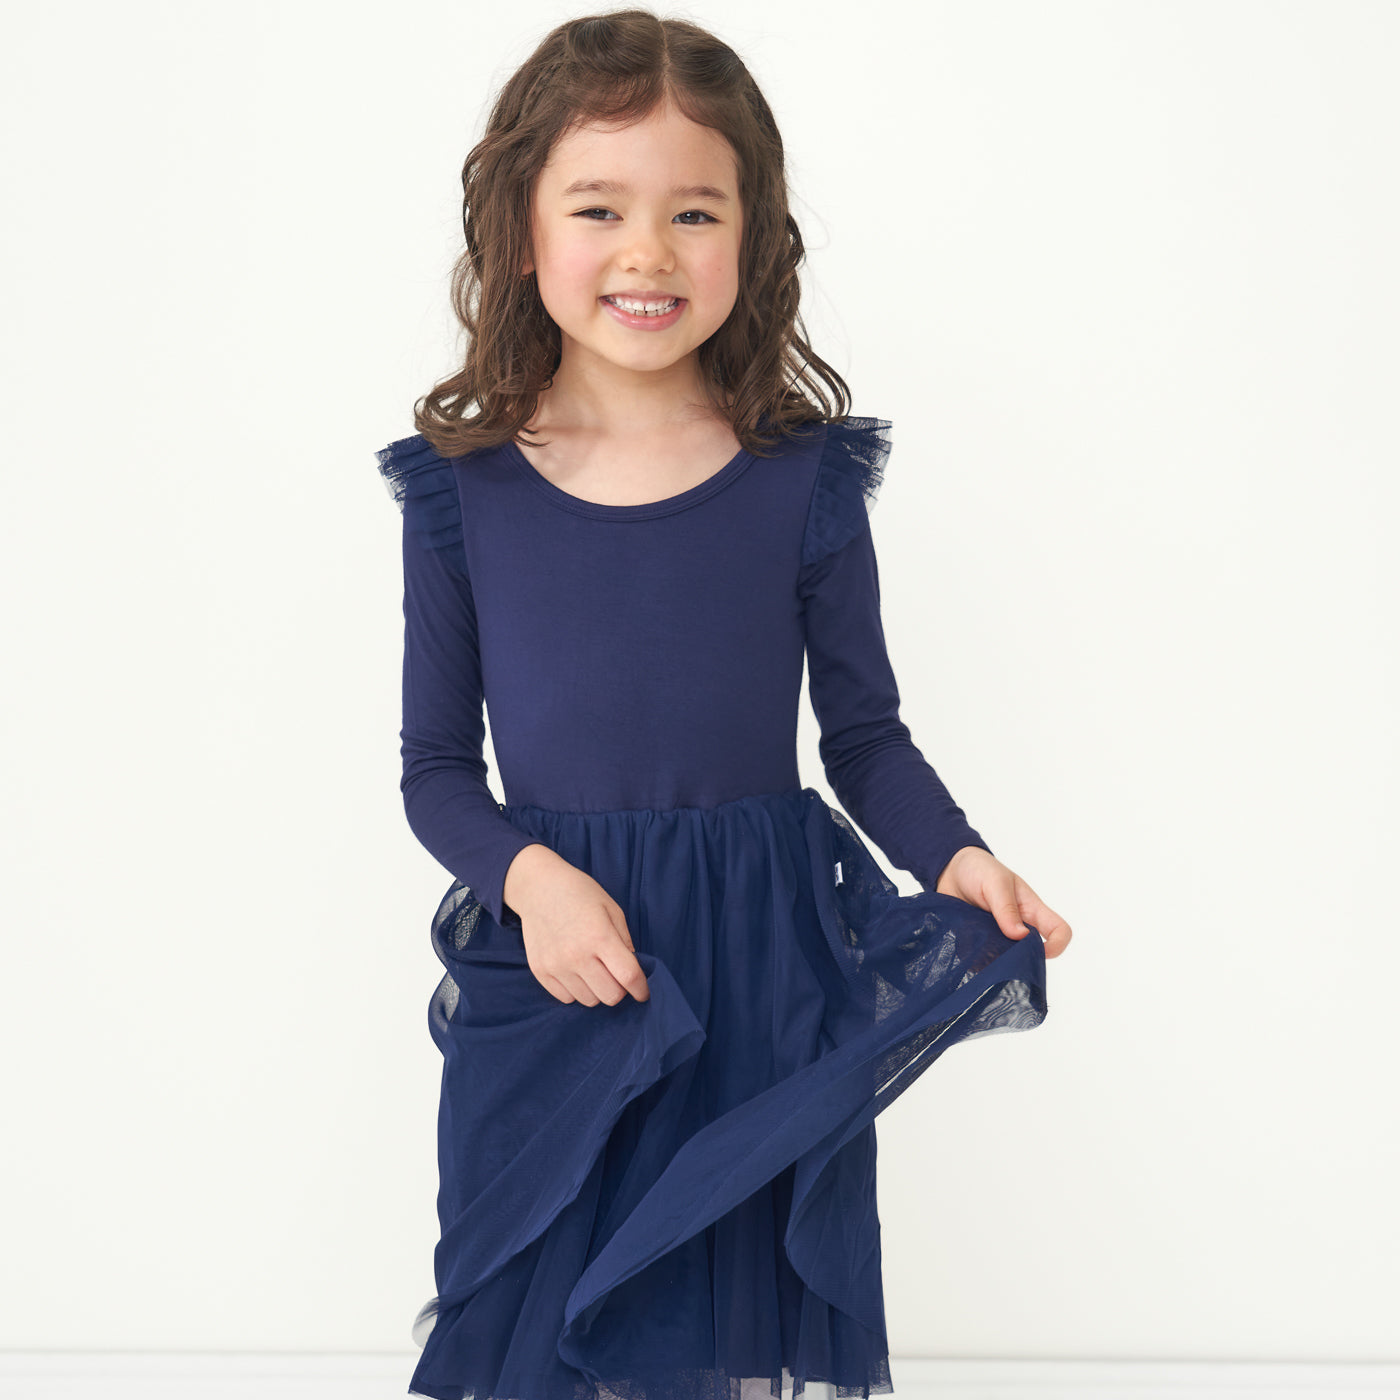 Child holding up the outer layer of the Classic Navy flutter tutu dress she is wearing